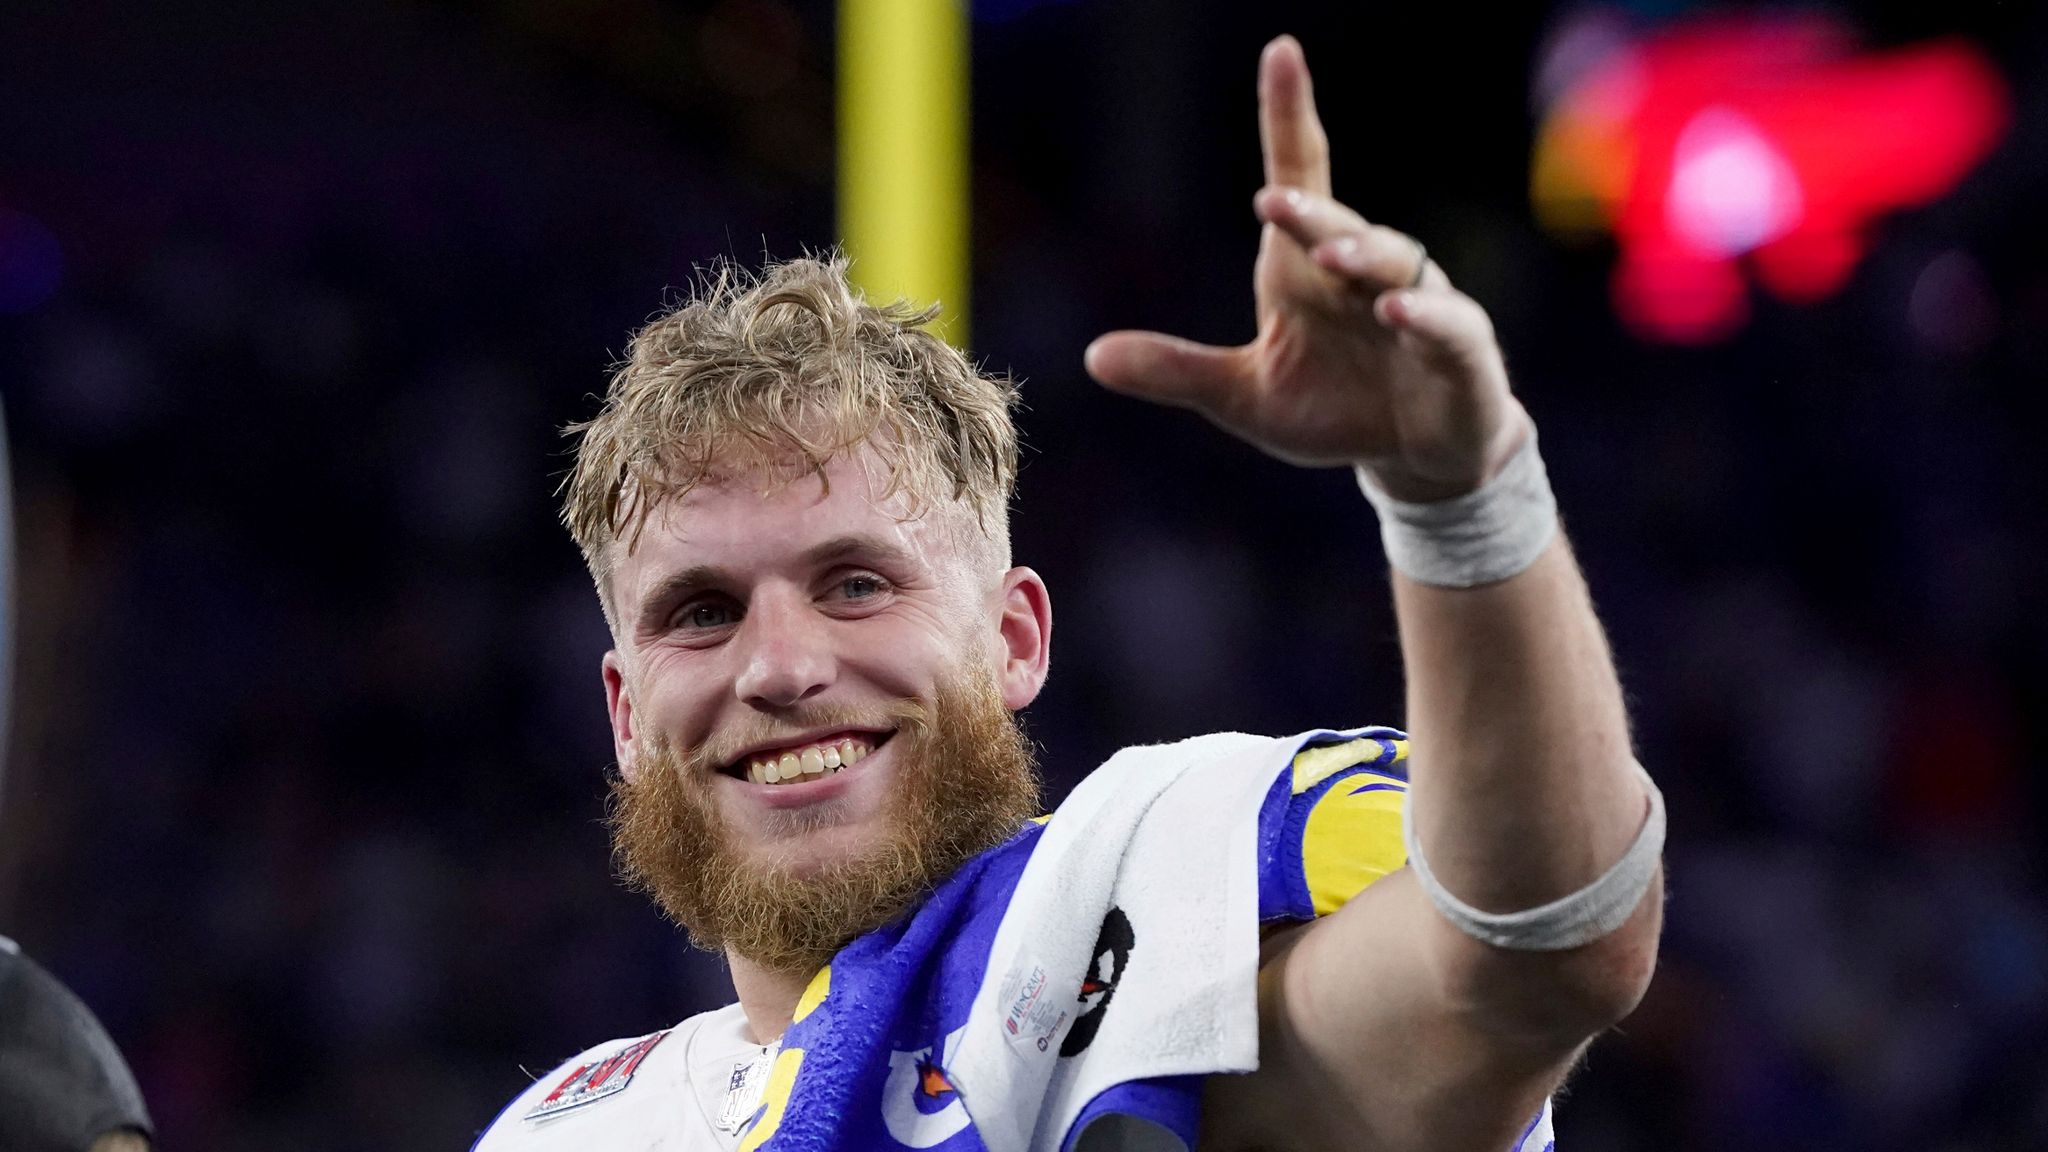 Cooper Kupp: Los Angeles Rams star reveals he had vision of winning Super Bowl MVP after New England Patriots defeat | NFL News | Sky Sports